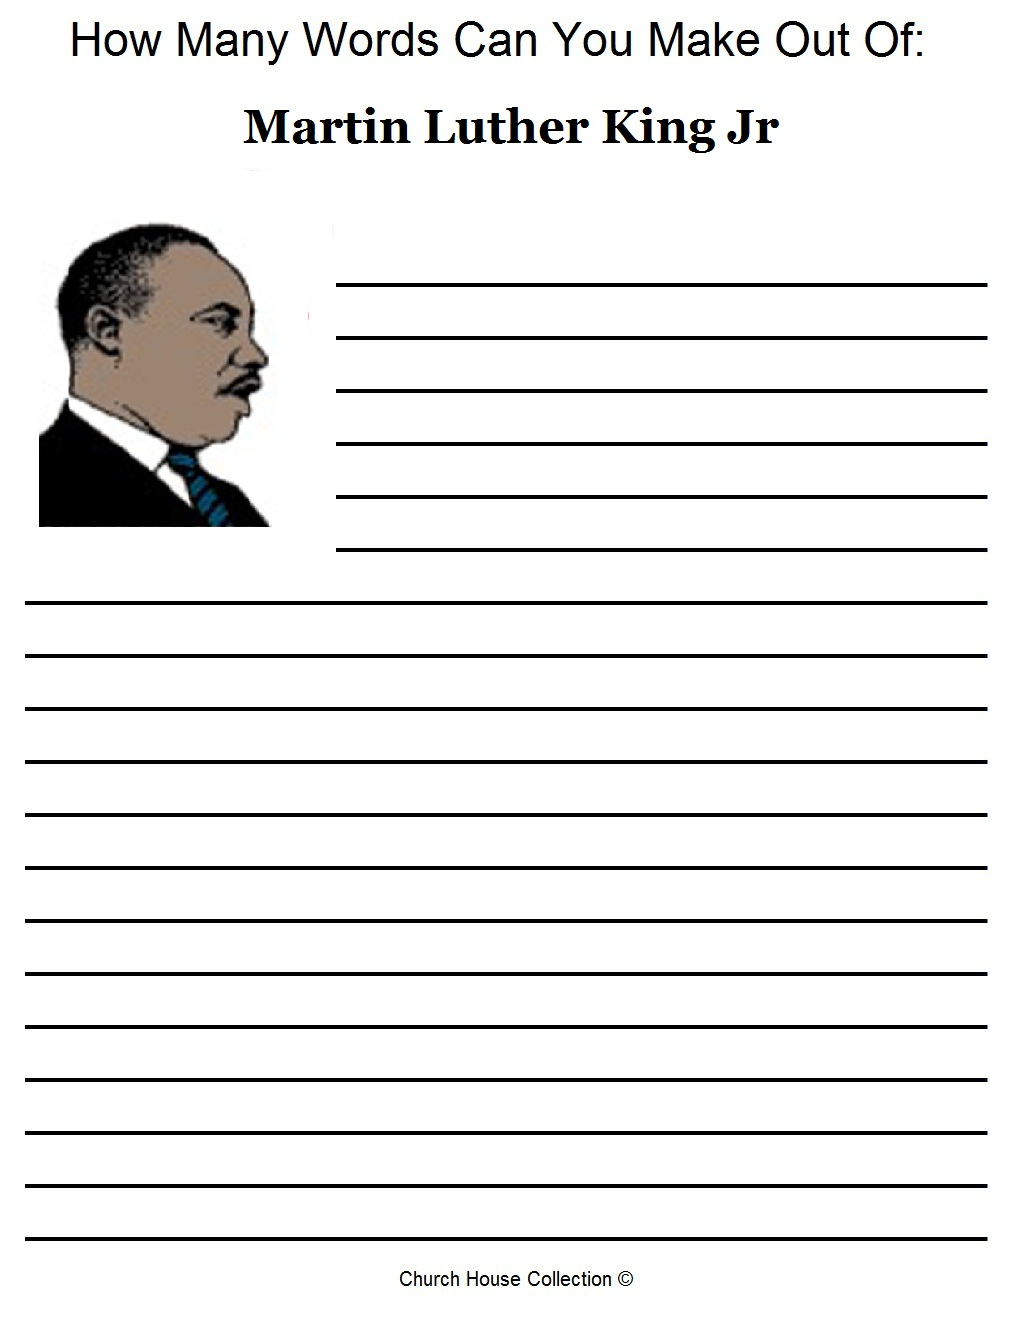 Church House Collection Blog: Free Martin Luther King Jr Worksheets | Martin Luther King Free Printables Worksheets